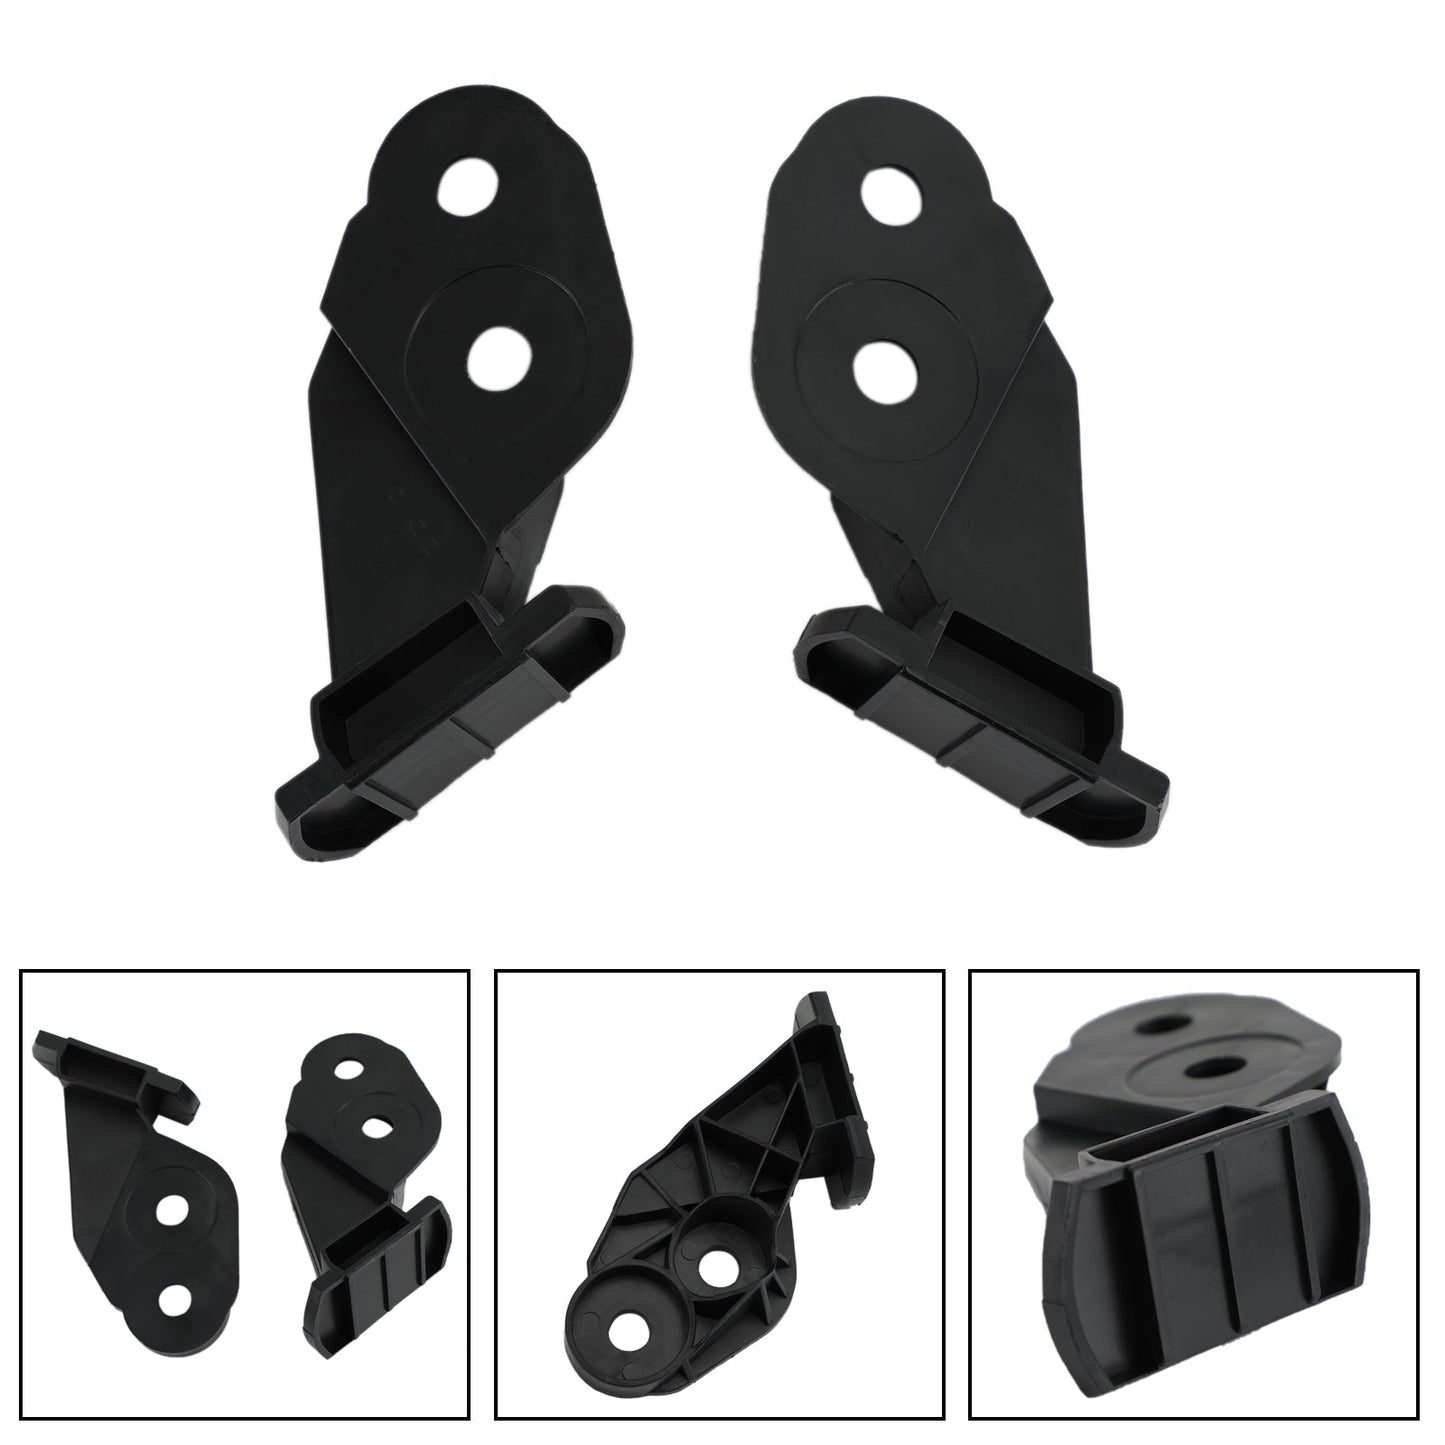 Front bumper fixings mounting clips For BMW 3 series E46 2001-2004 Black